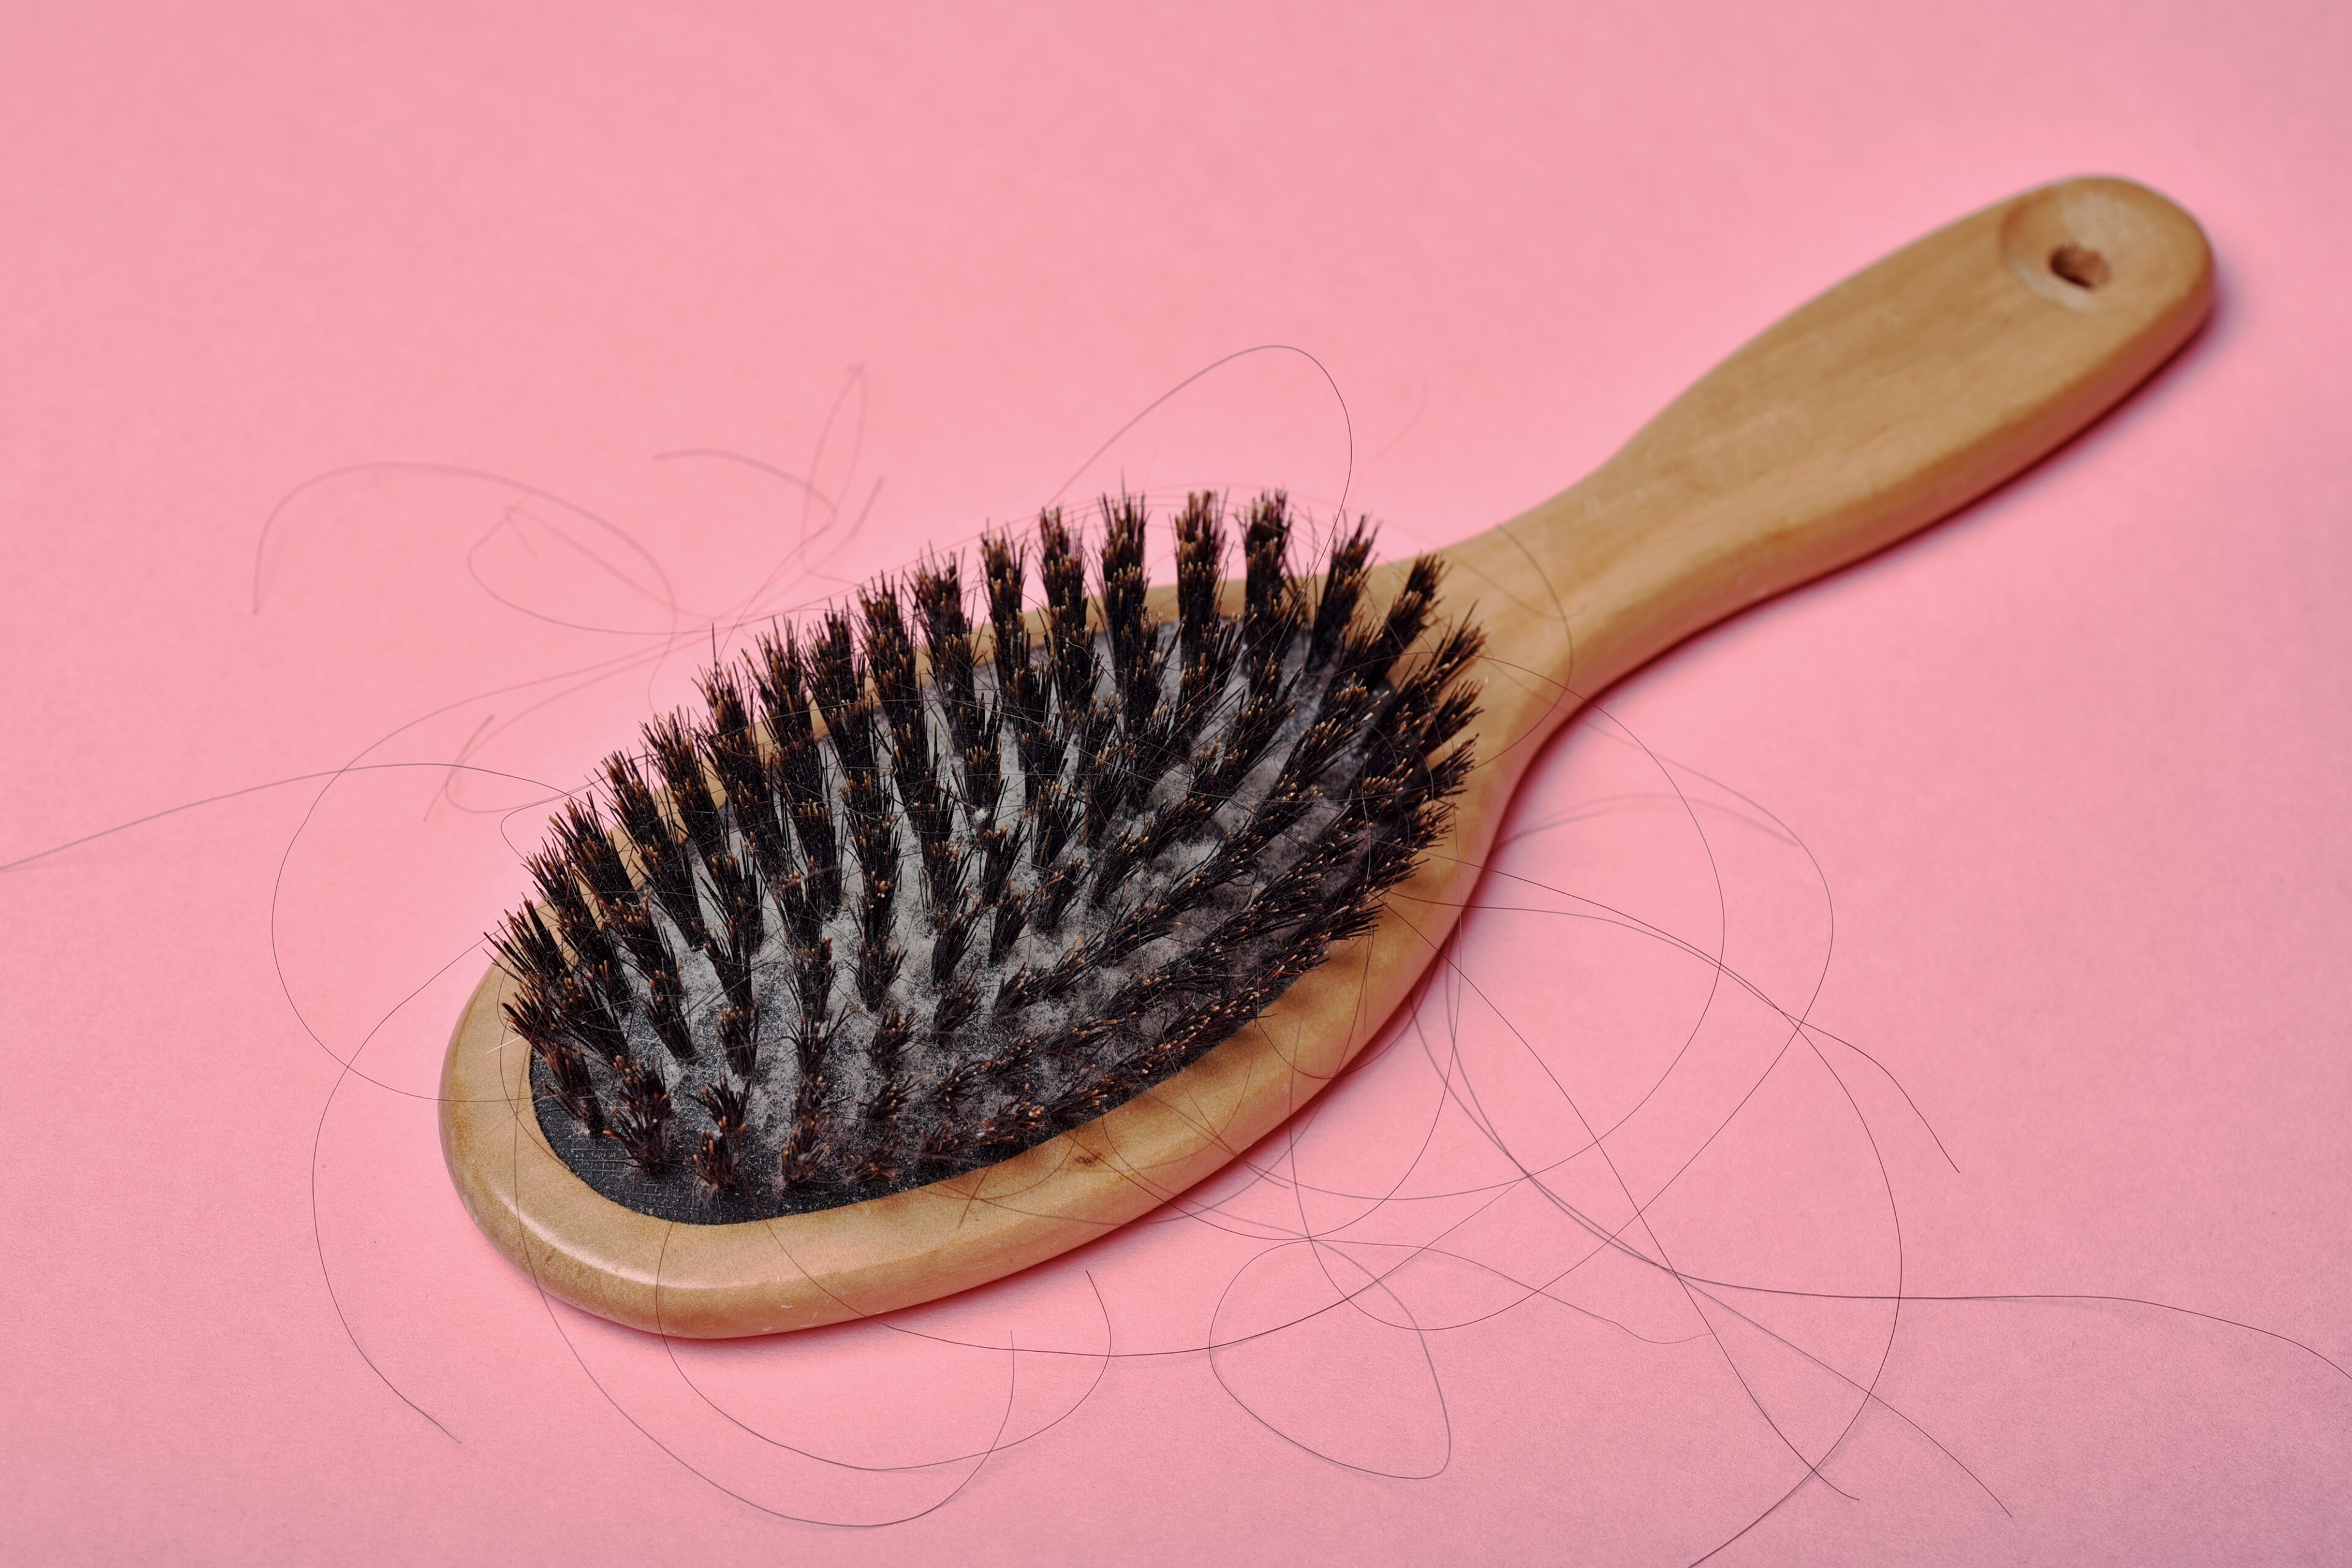 Dead Skin Cell Residue On The Unclean Comb